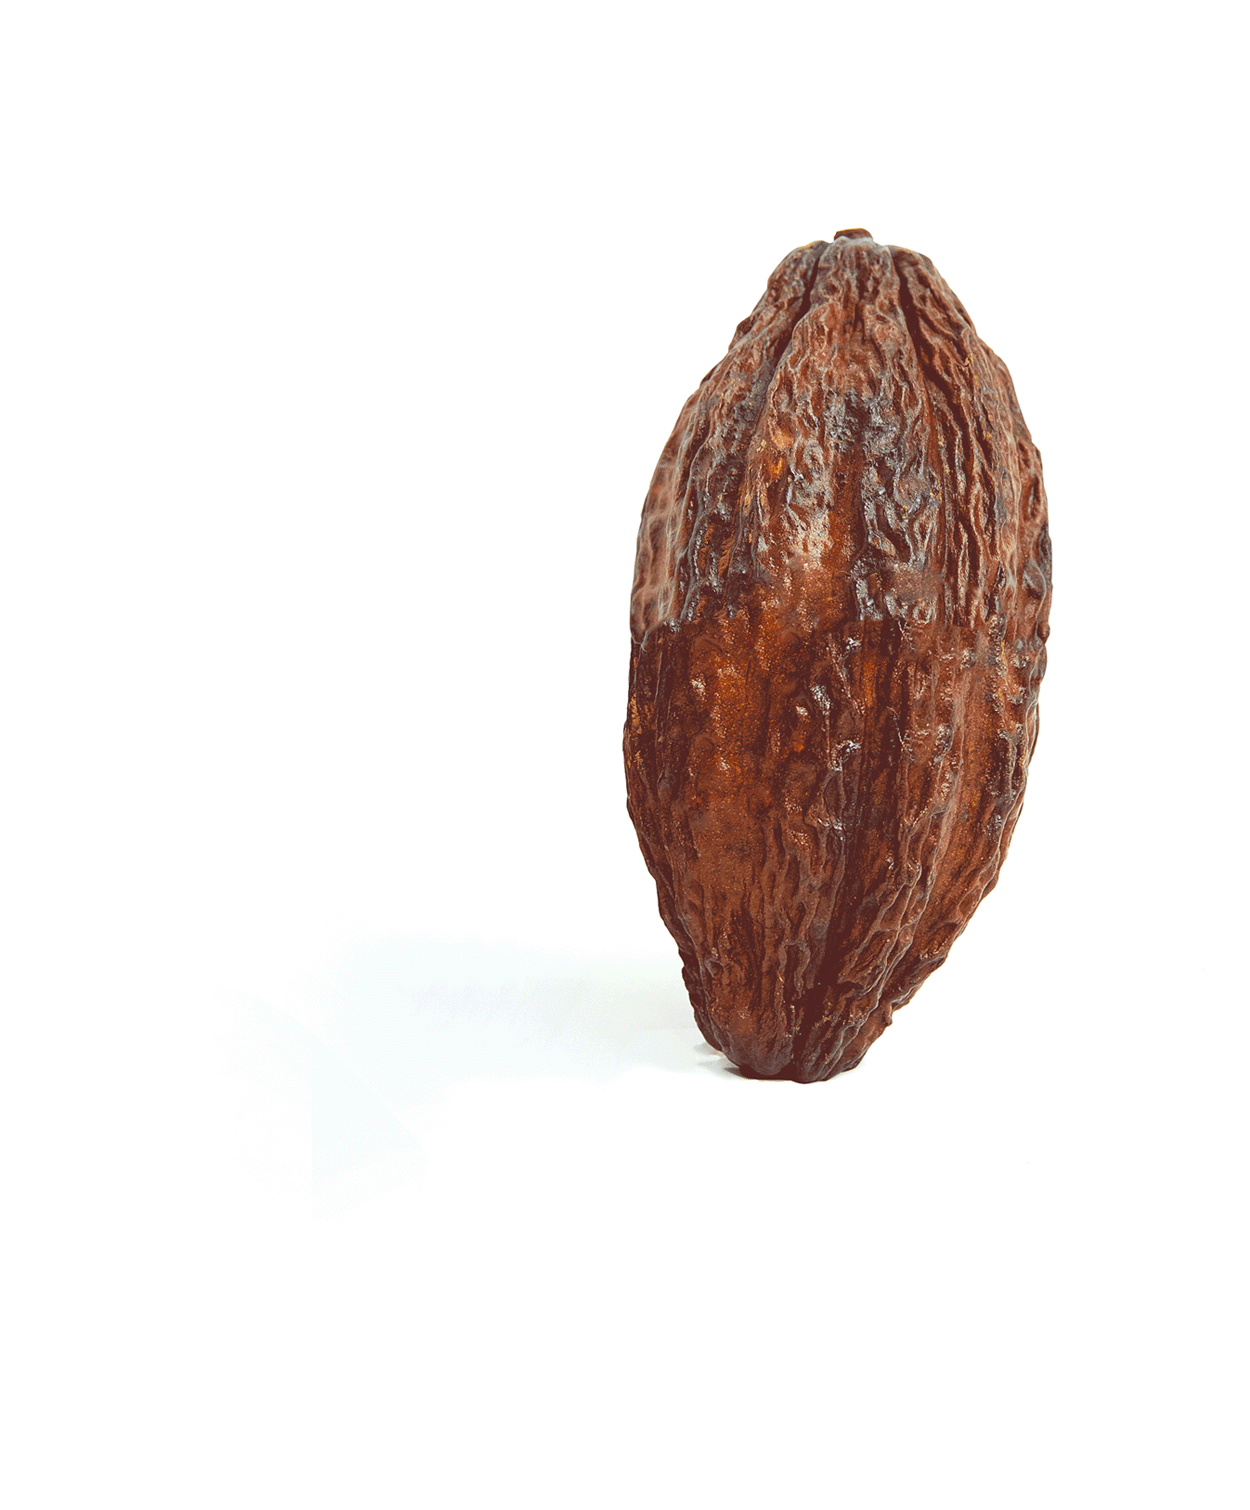 Animation of a whole Cacao Fruit dissected displaying mesocarp, endocarp, pulp and beans on a white background.